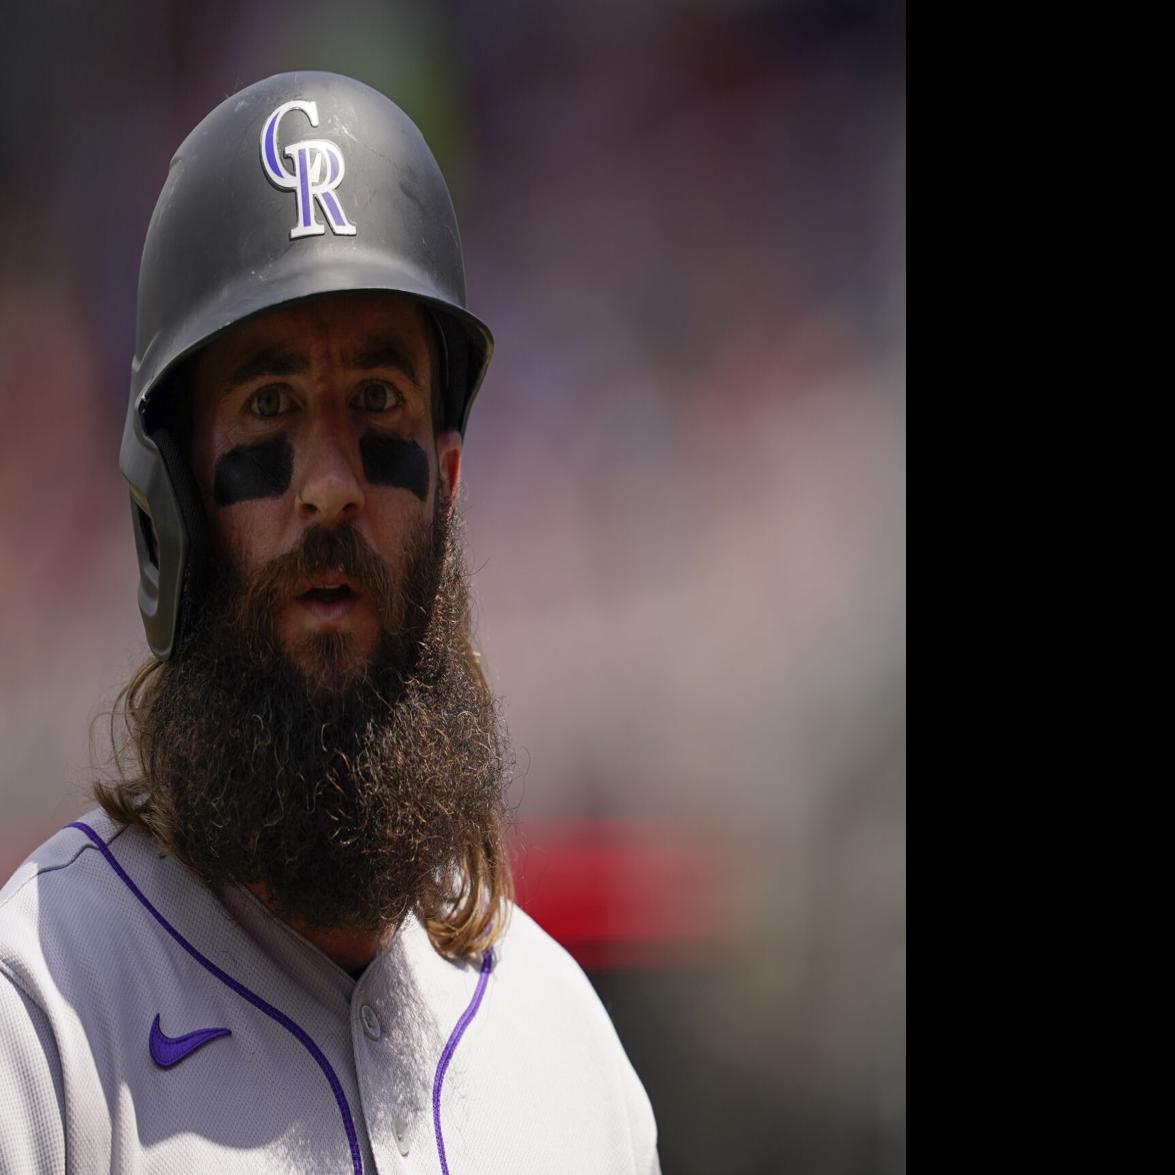 Charlie Blackmon Revisits Launch Angle